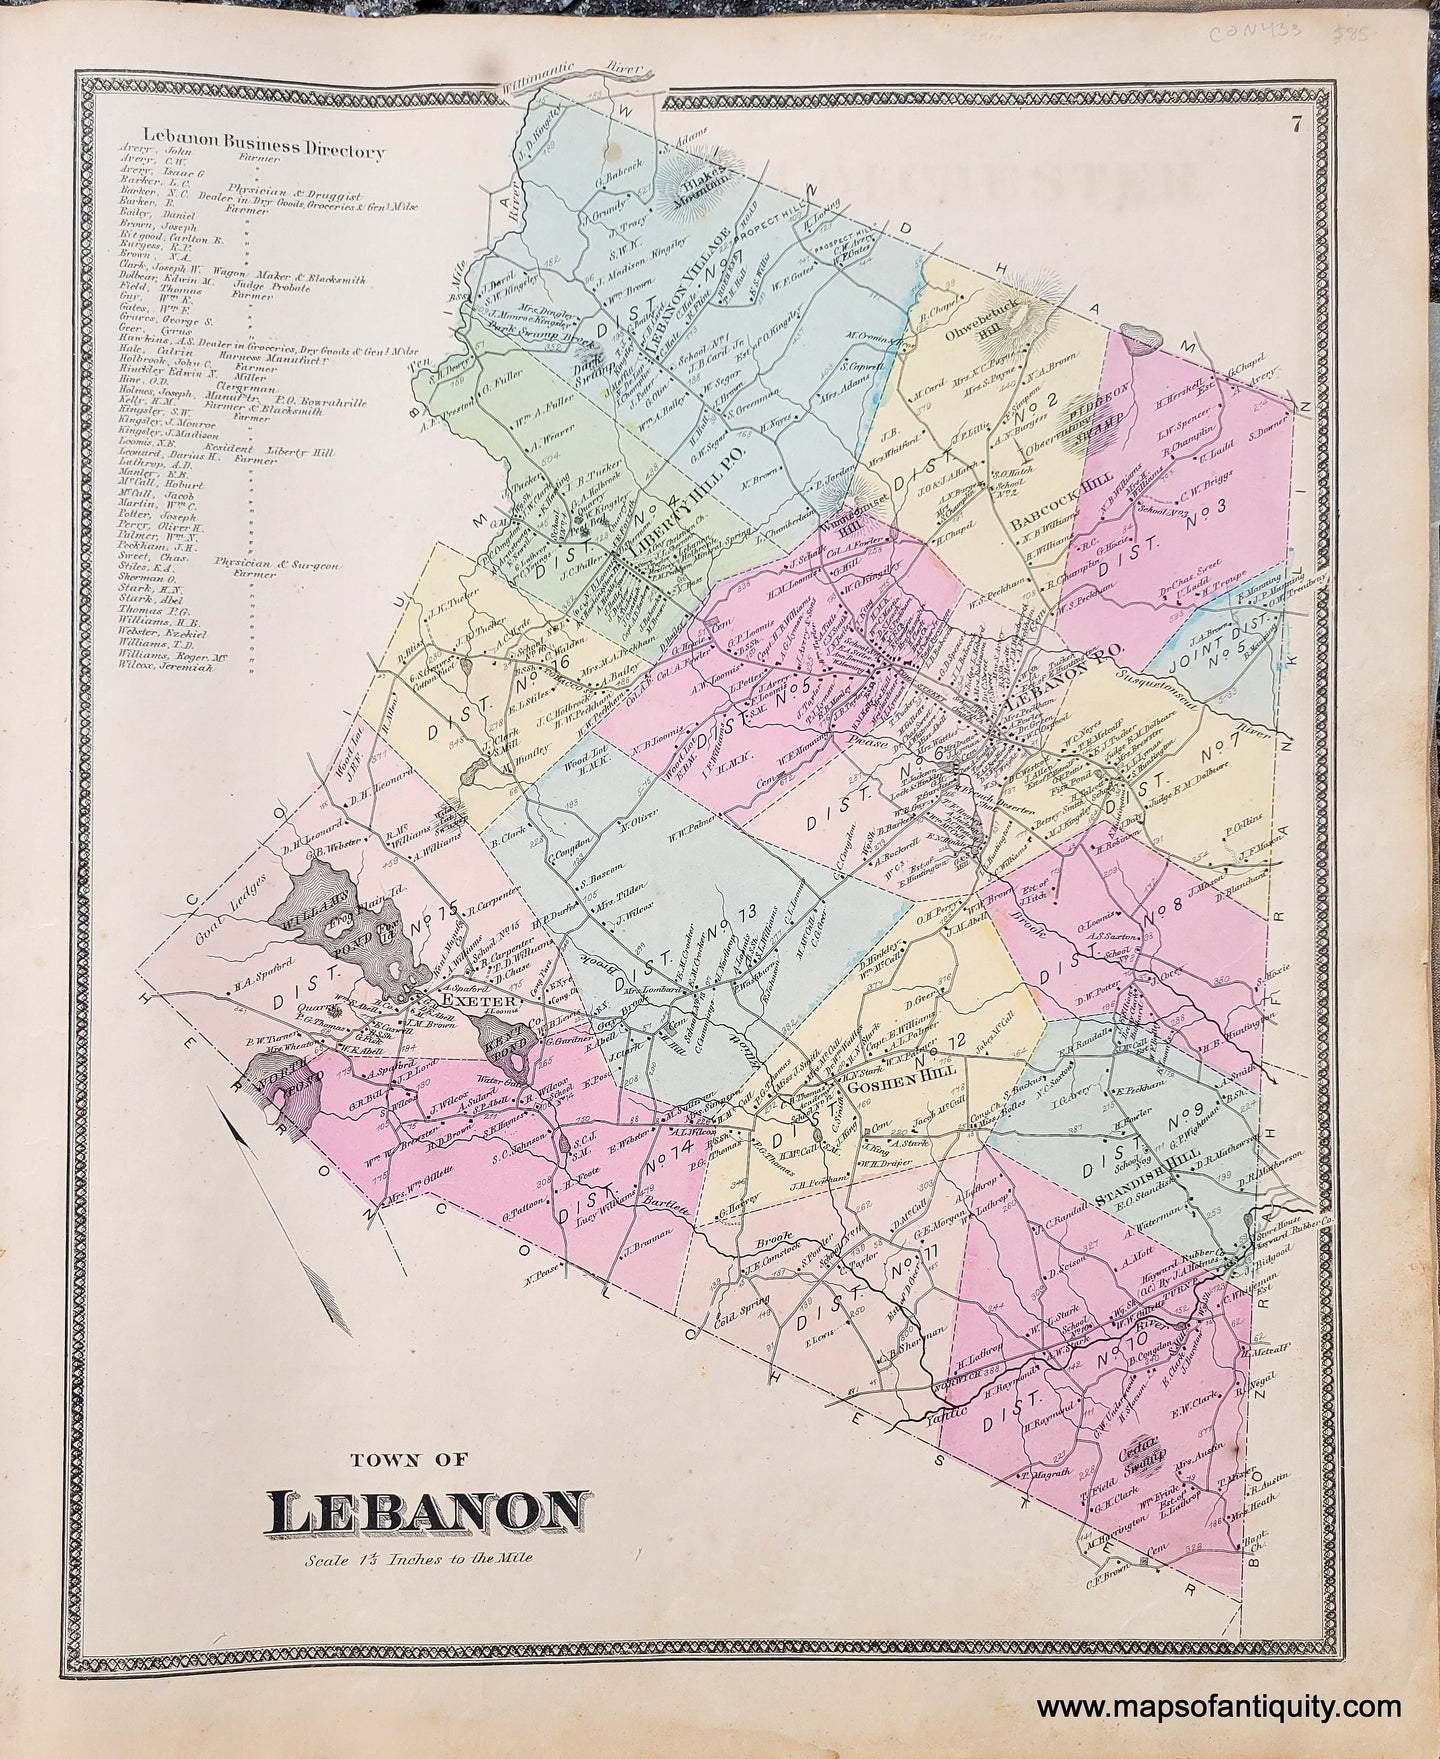 Genuine-Antique-Hand-Colored-Map-Town-of-Lebanon-CT--1868-Beers-Ellis-Soule--Maps-Of-Antiquity